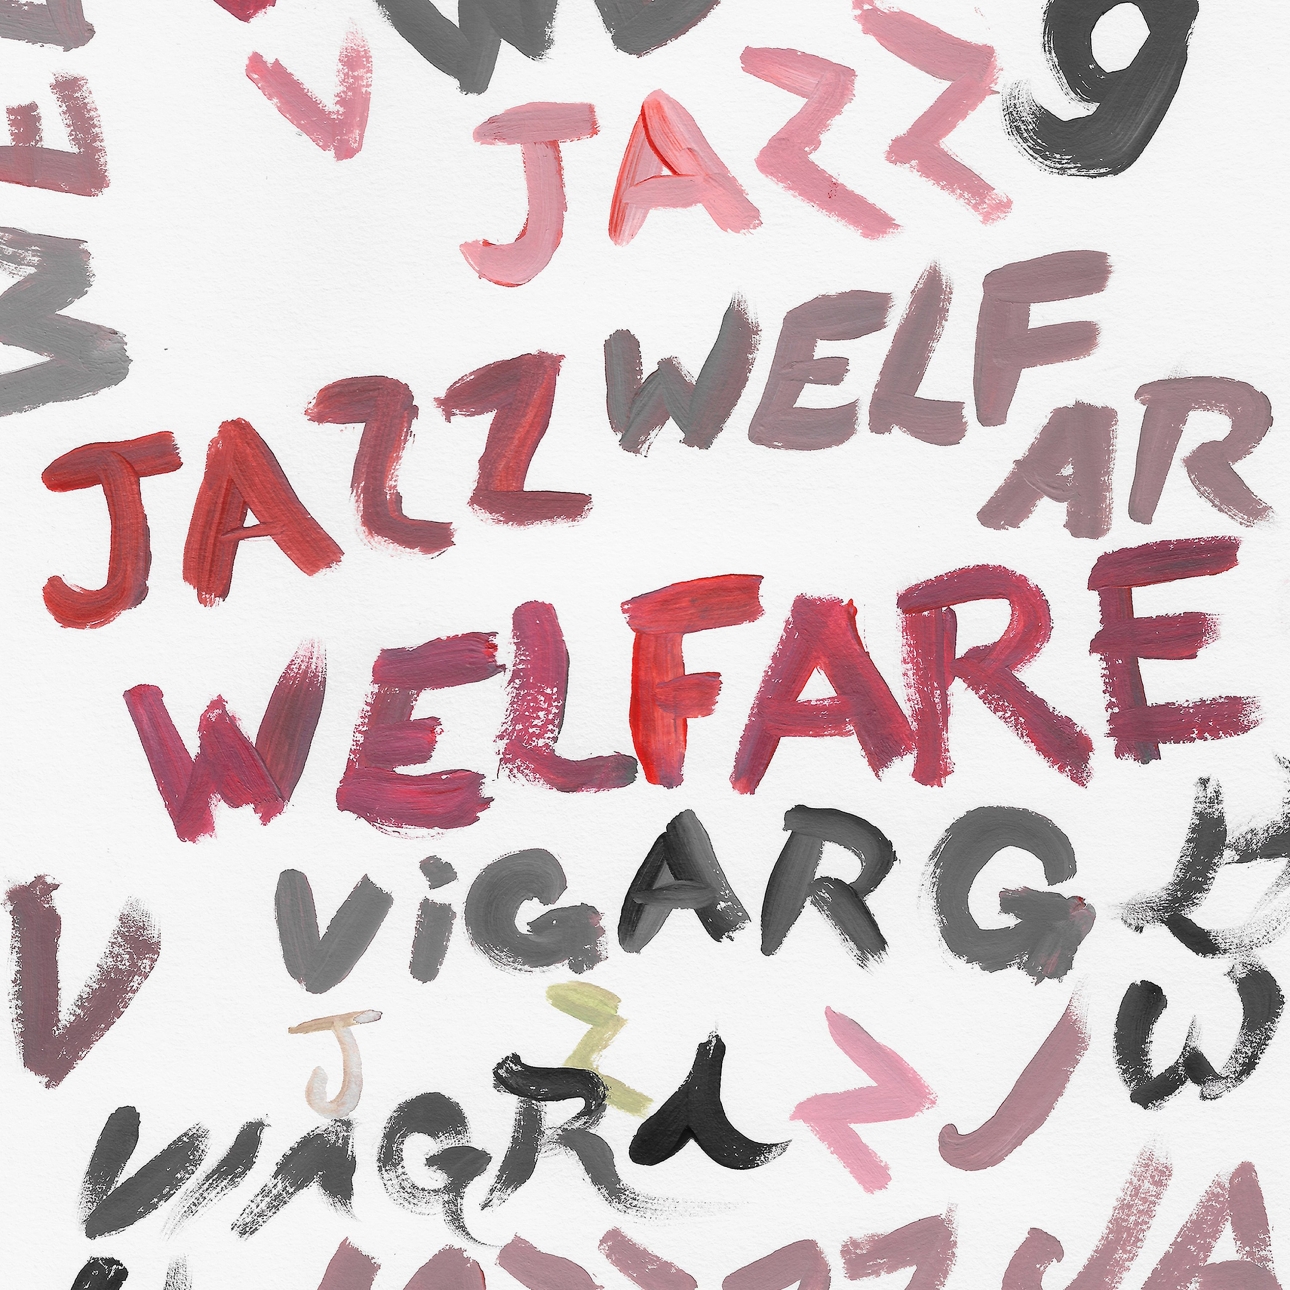 Read more about the article Viagra Boys – Welfare Jazz